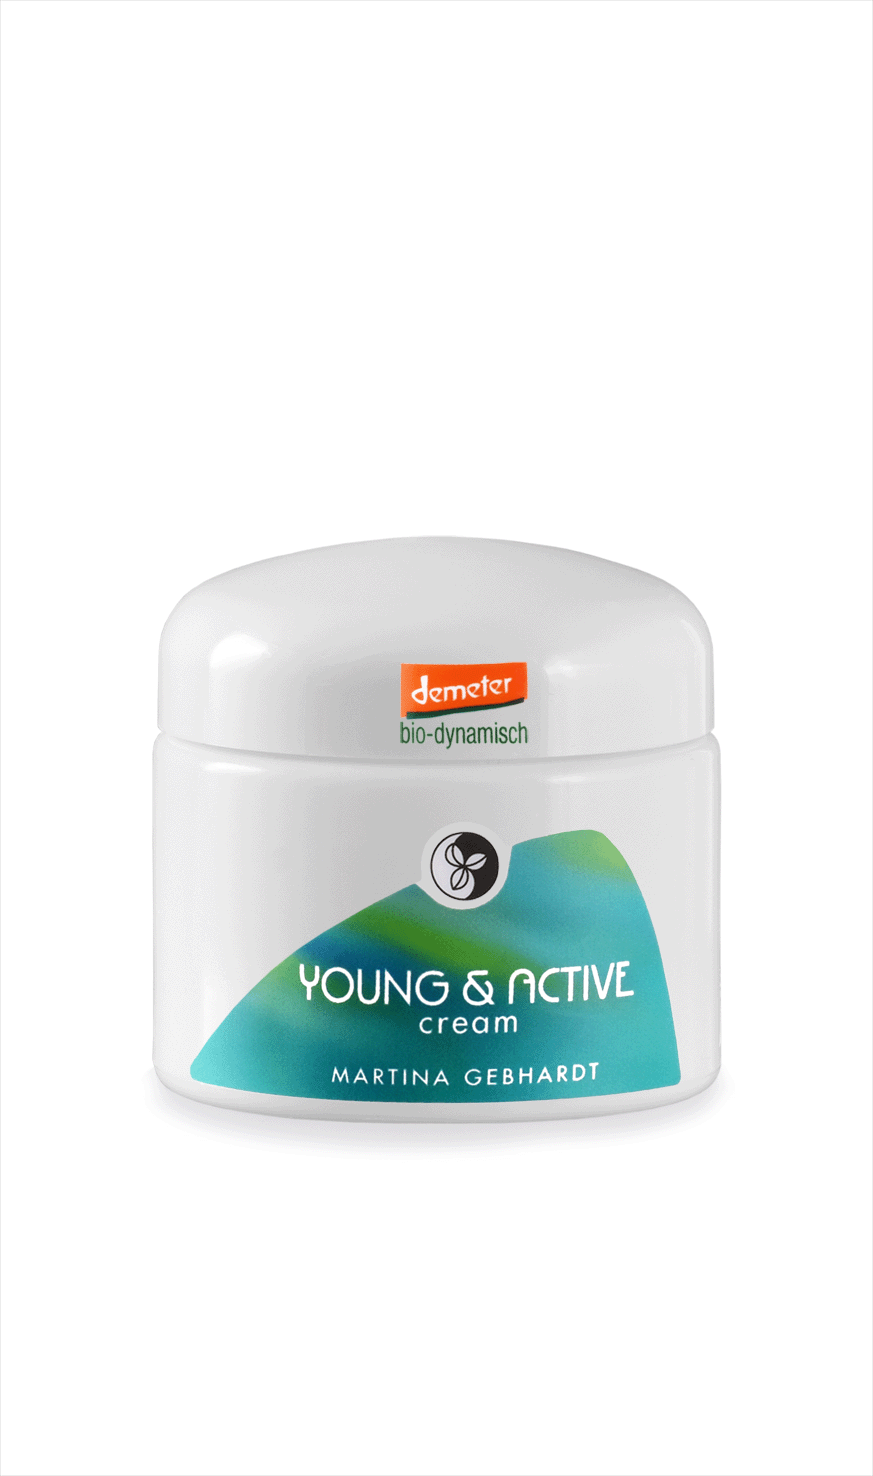 YOUNG & ACTIVE Cream